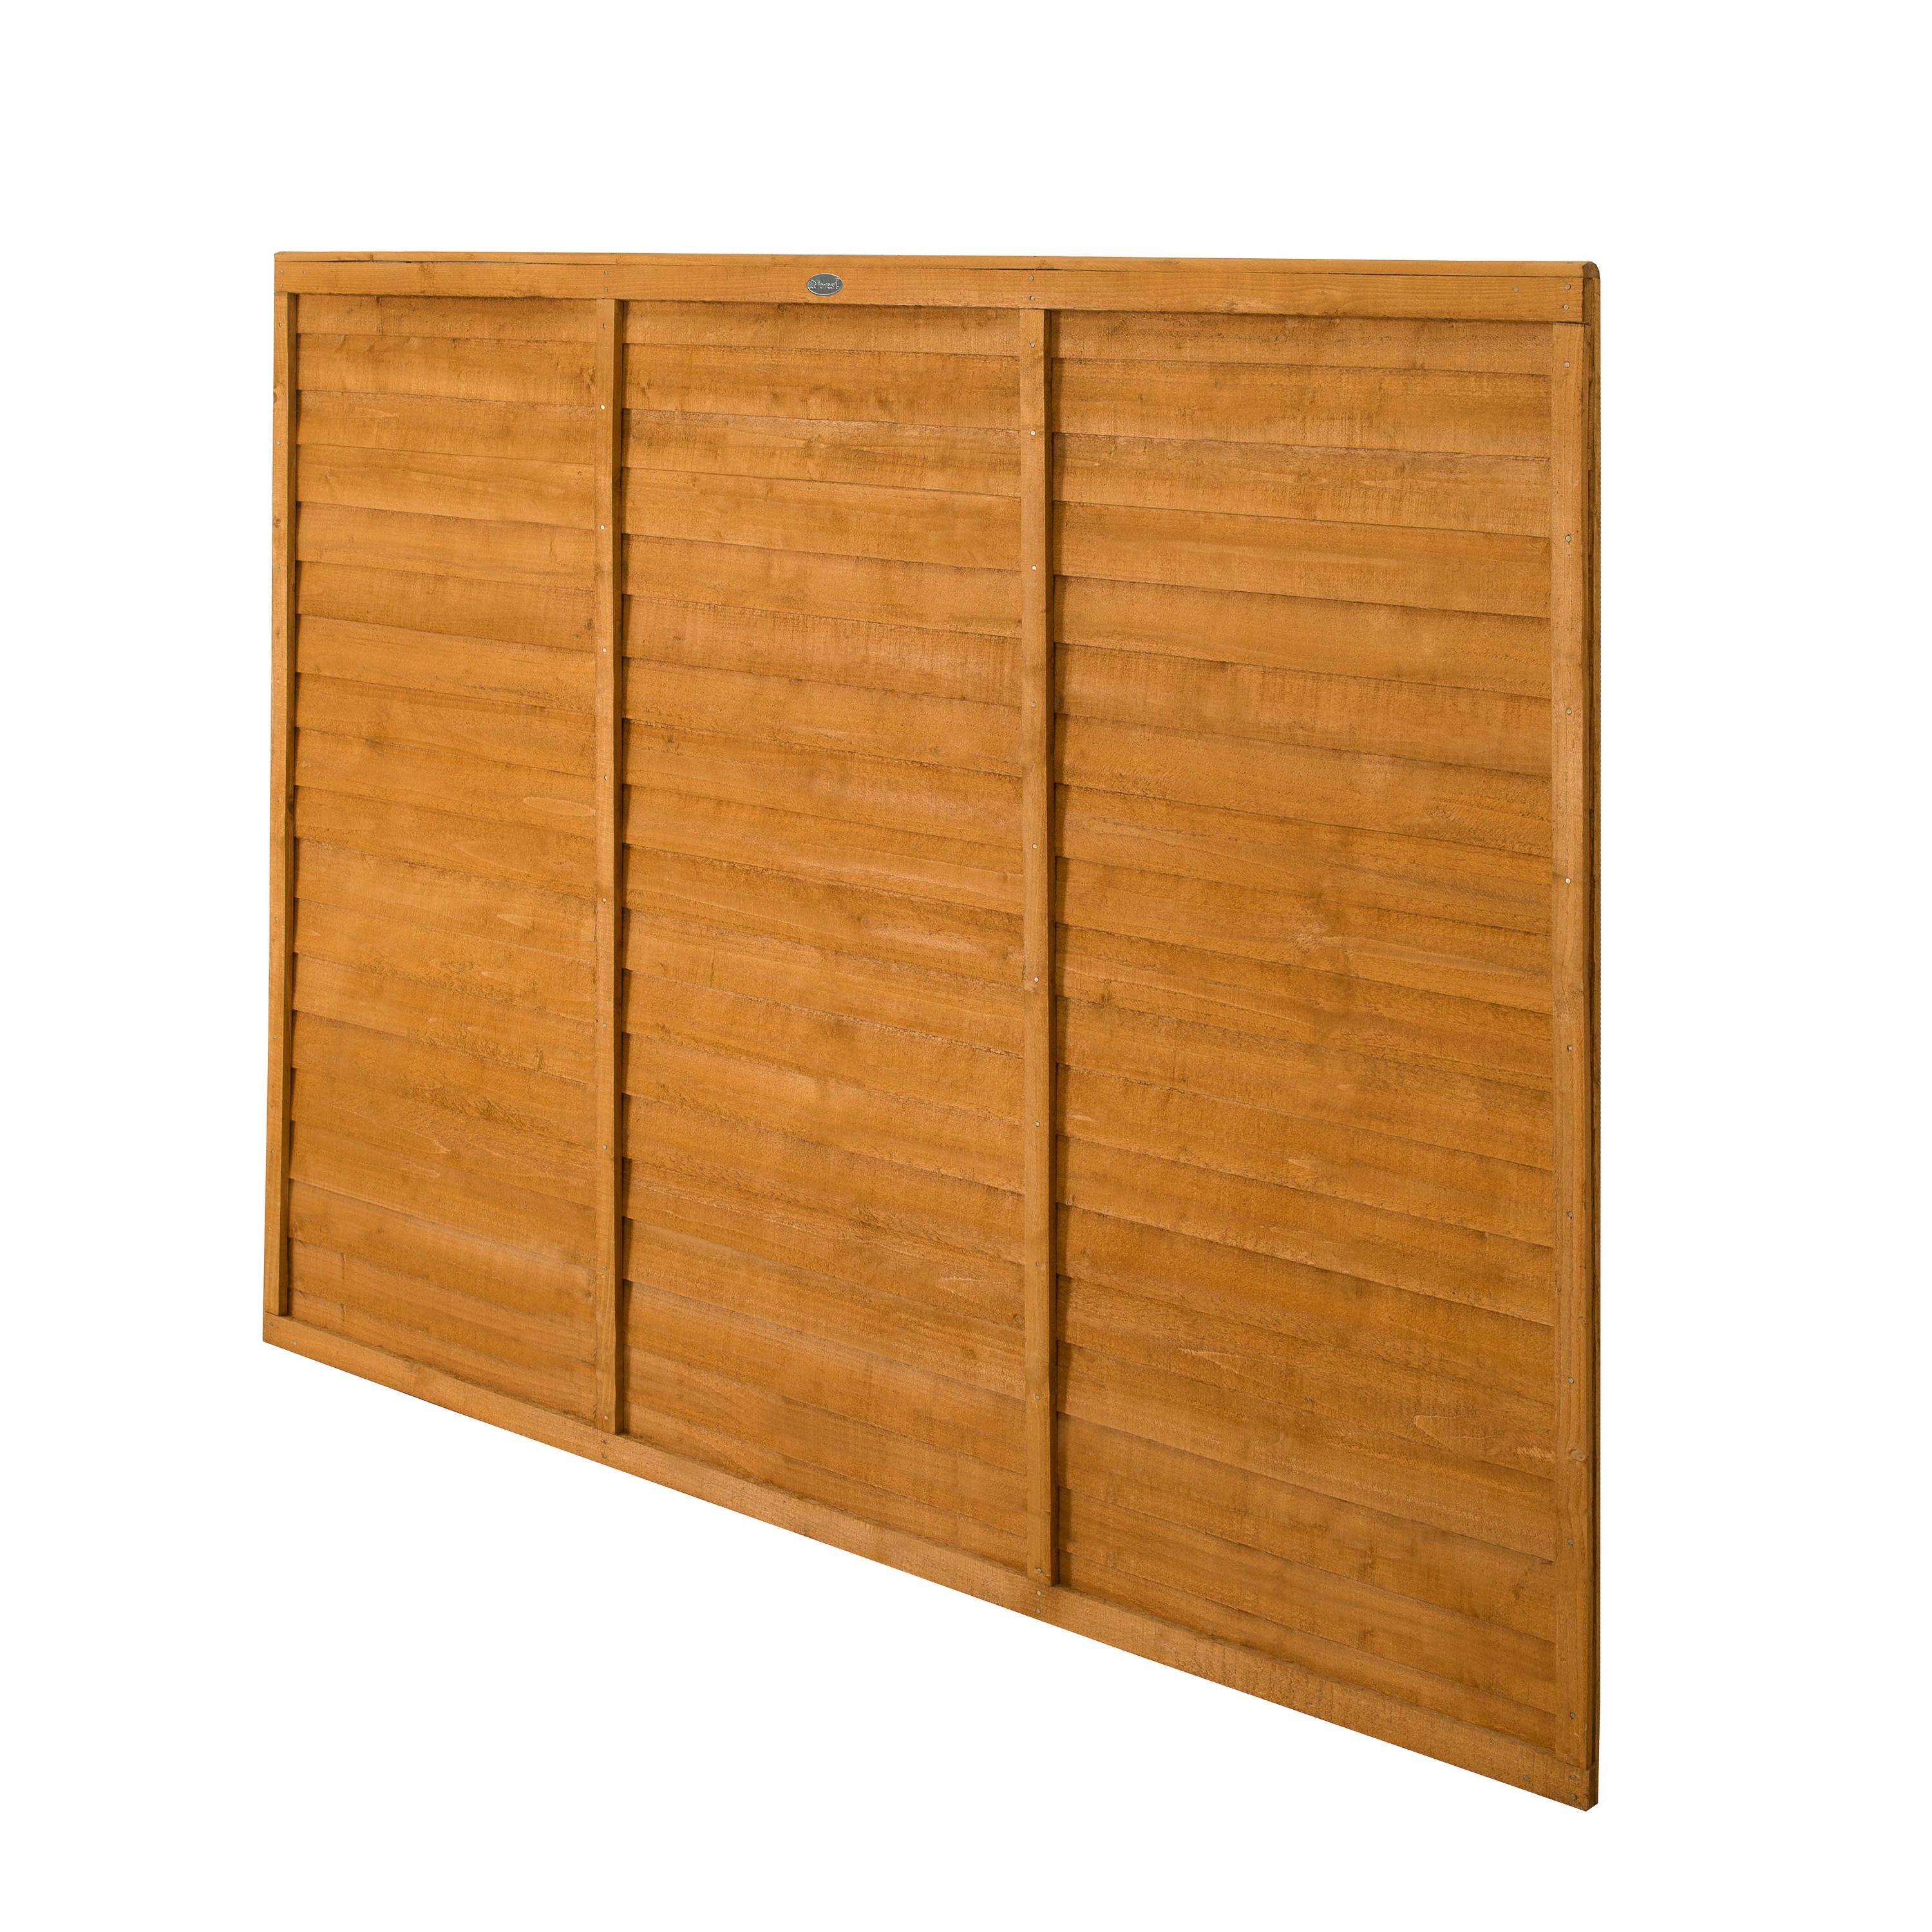 Forest Garden Straight edge Lap Dip treated 5ft Wooden Fence panel (W)1.83m (H)1.52m